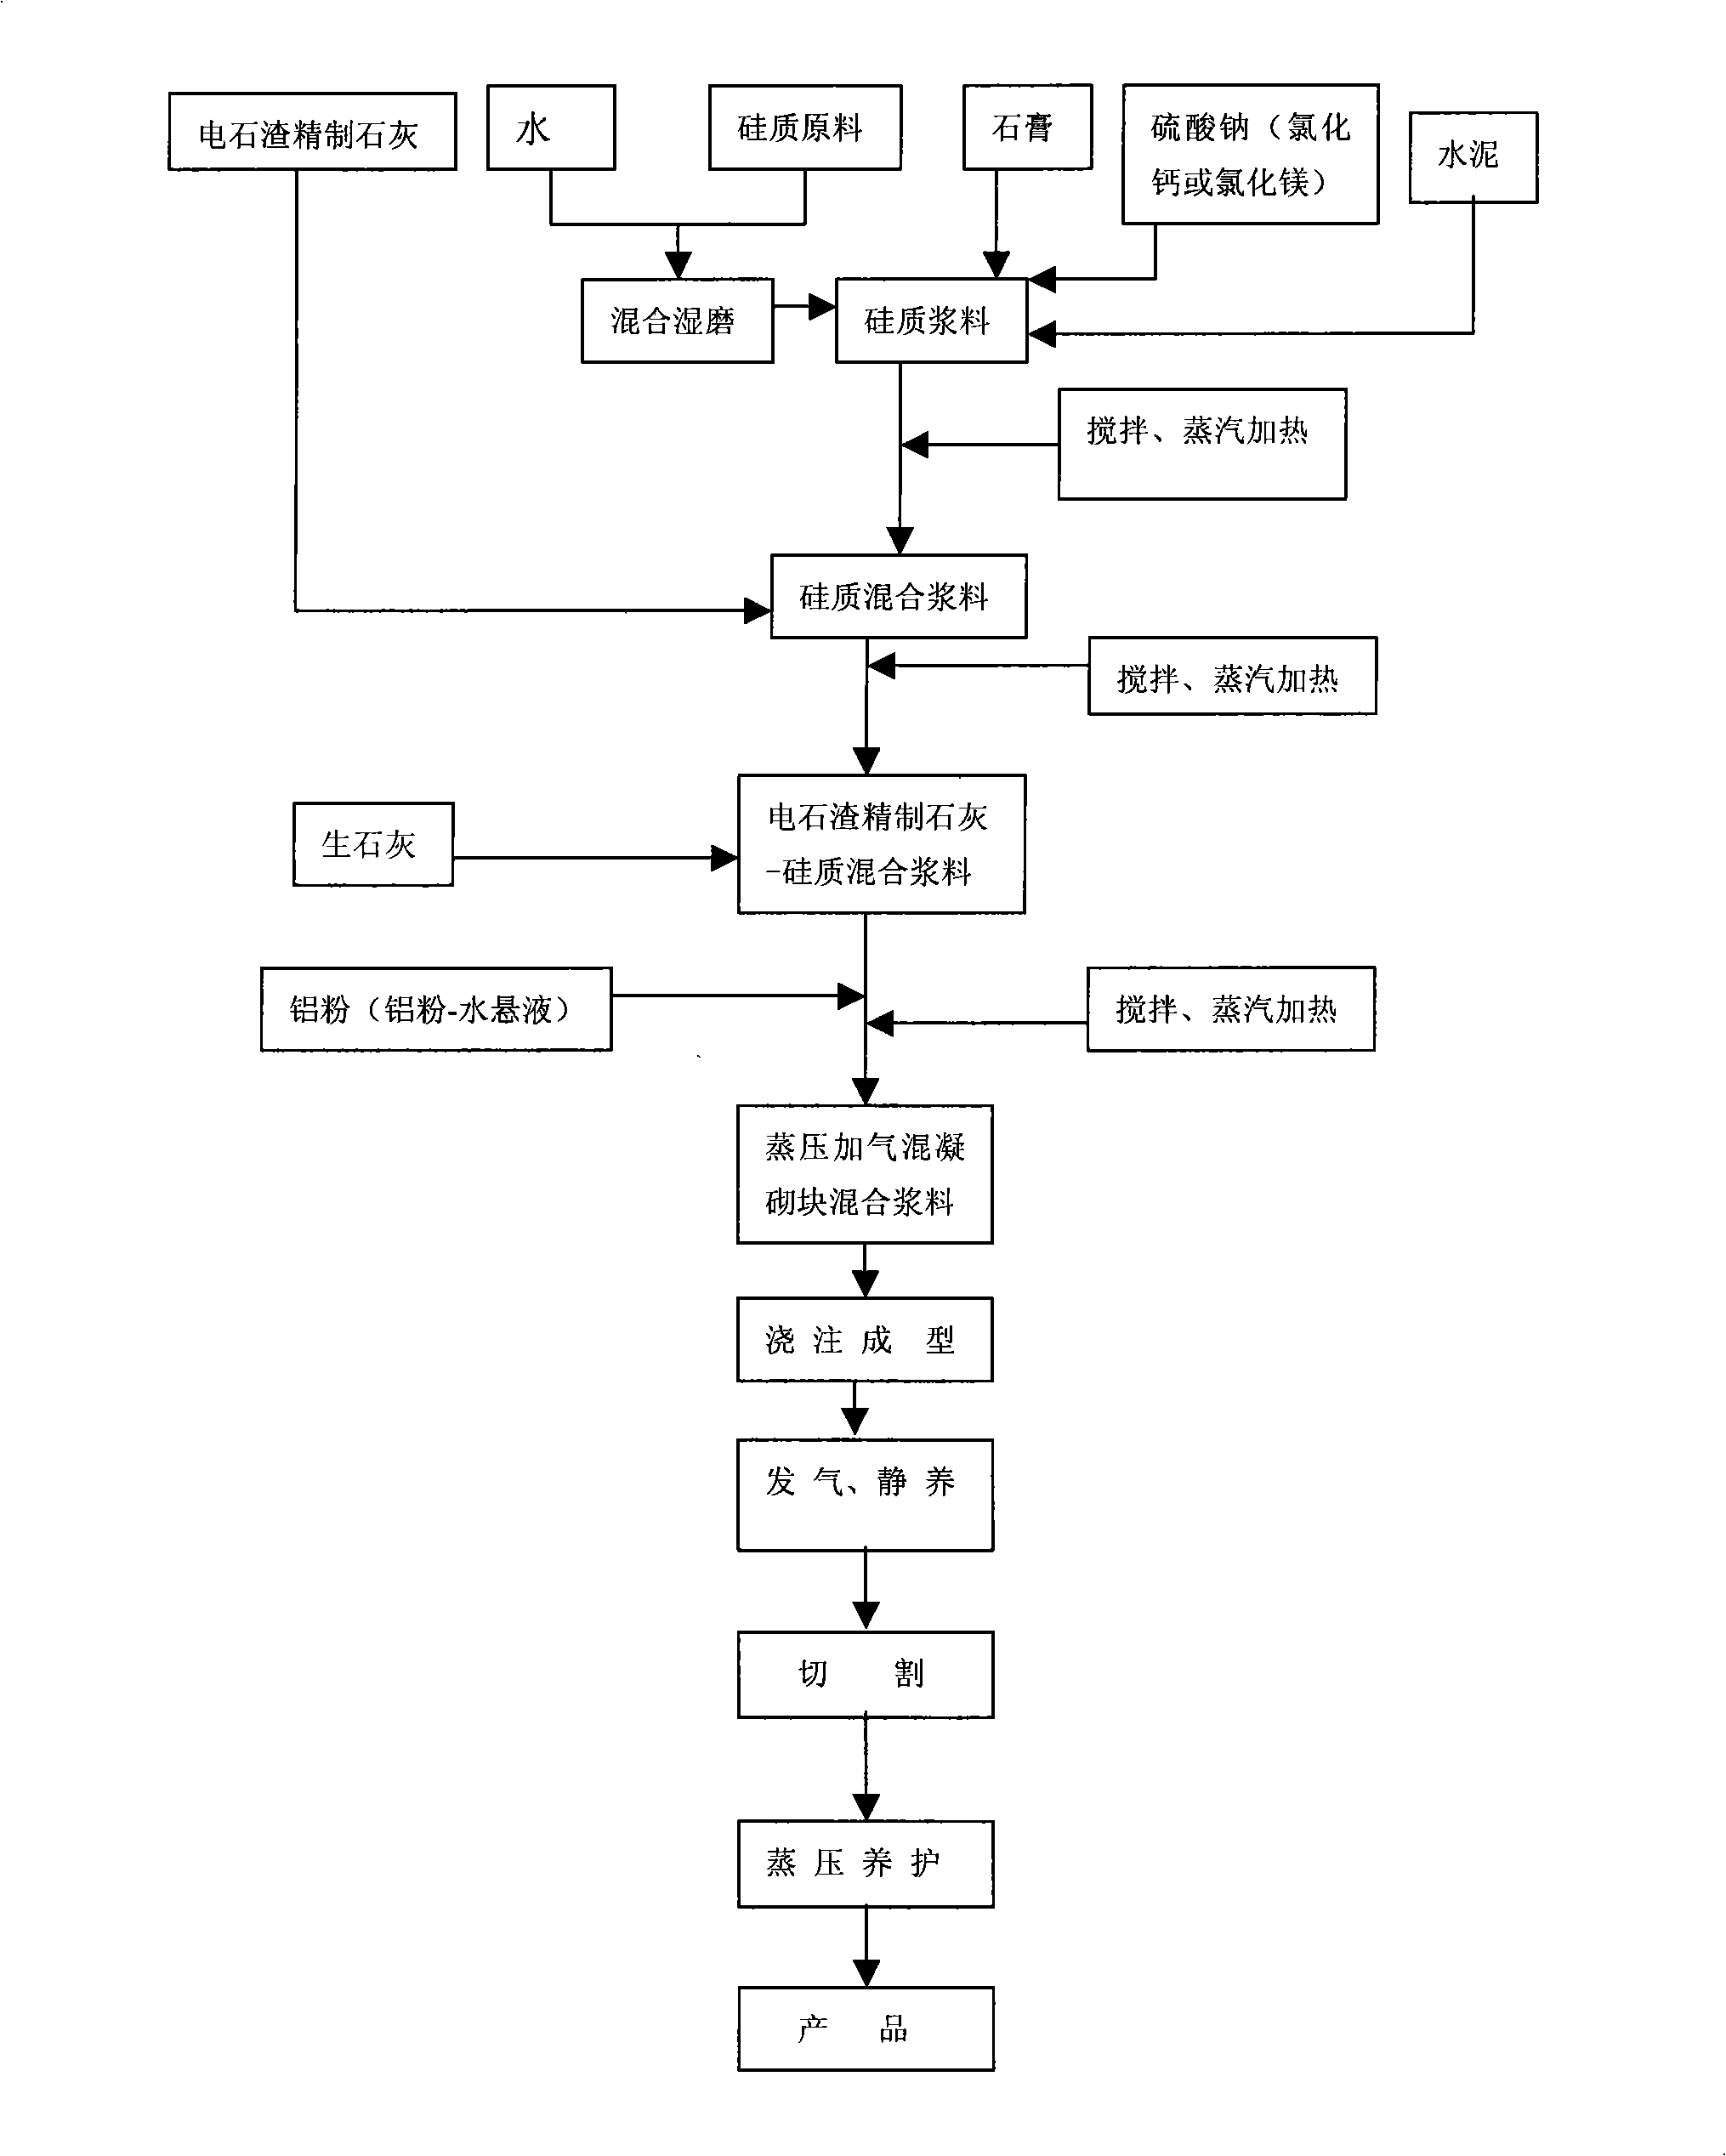 Production of autoclaved aerated building block material with crystal calcarea lime to partially partial substitute unslacked lime and method thereof